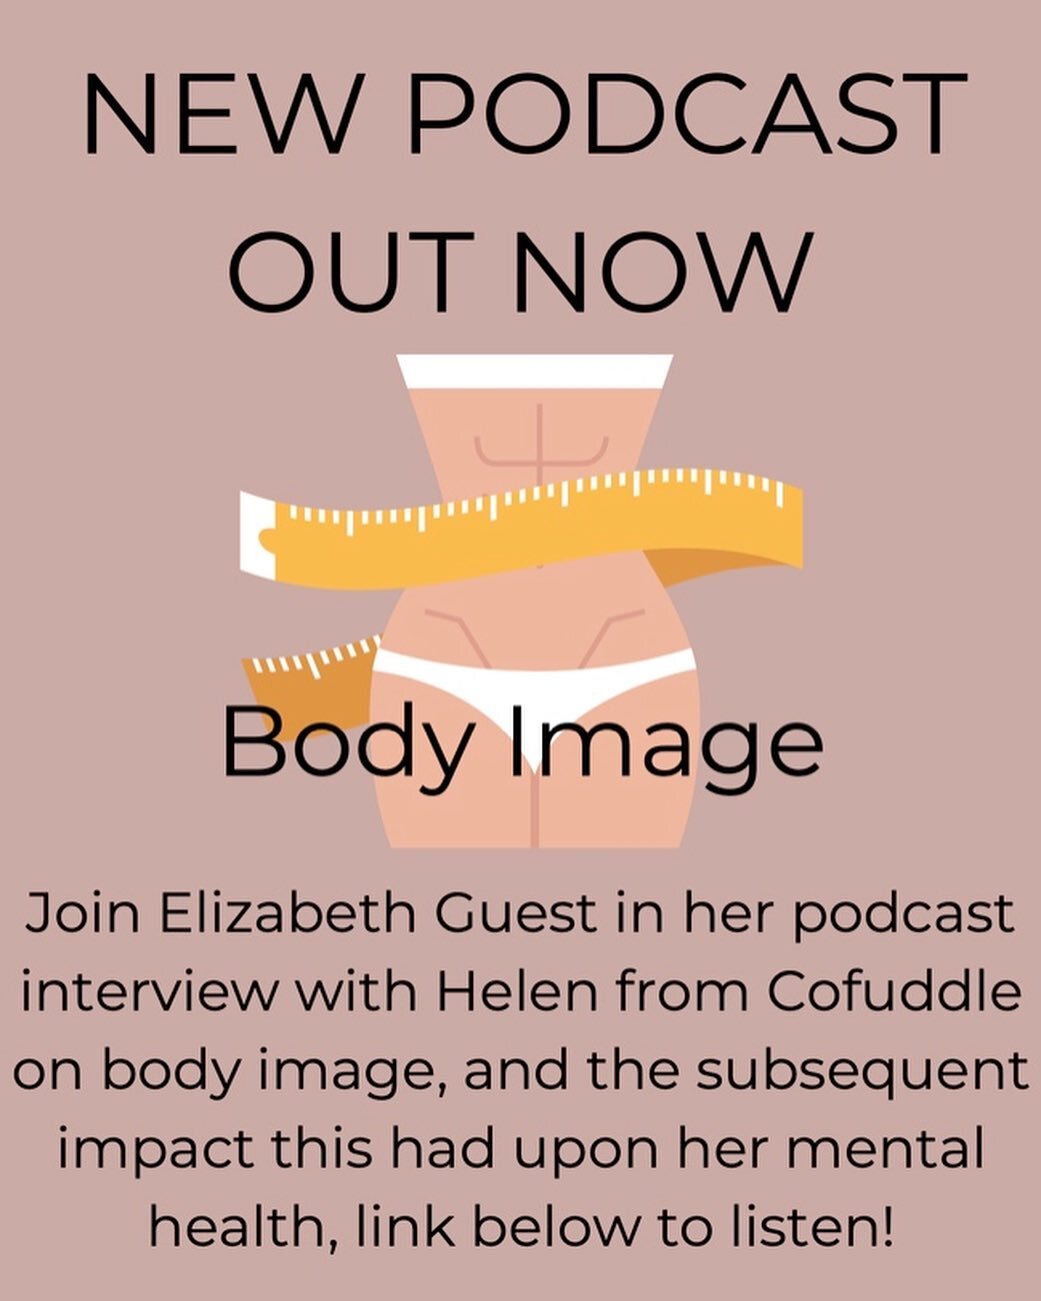 I&rsquo;ve recently taken part in an interview podcast with Helen from @cofuddle where we discuss body image &amp; mental health. Please feel free to give it a listen! https://www.cofuddle.com/fpcofuddle/ep1/eginterview